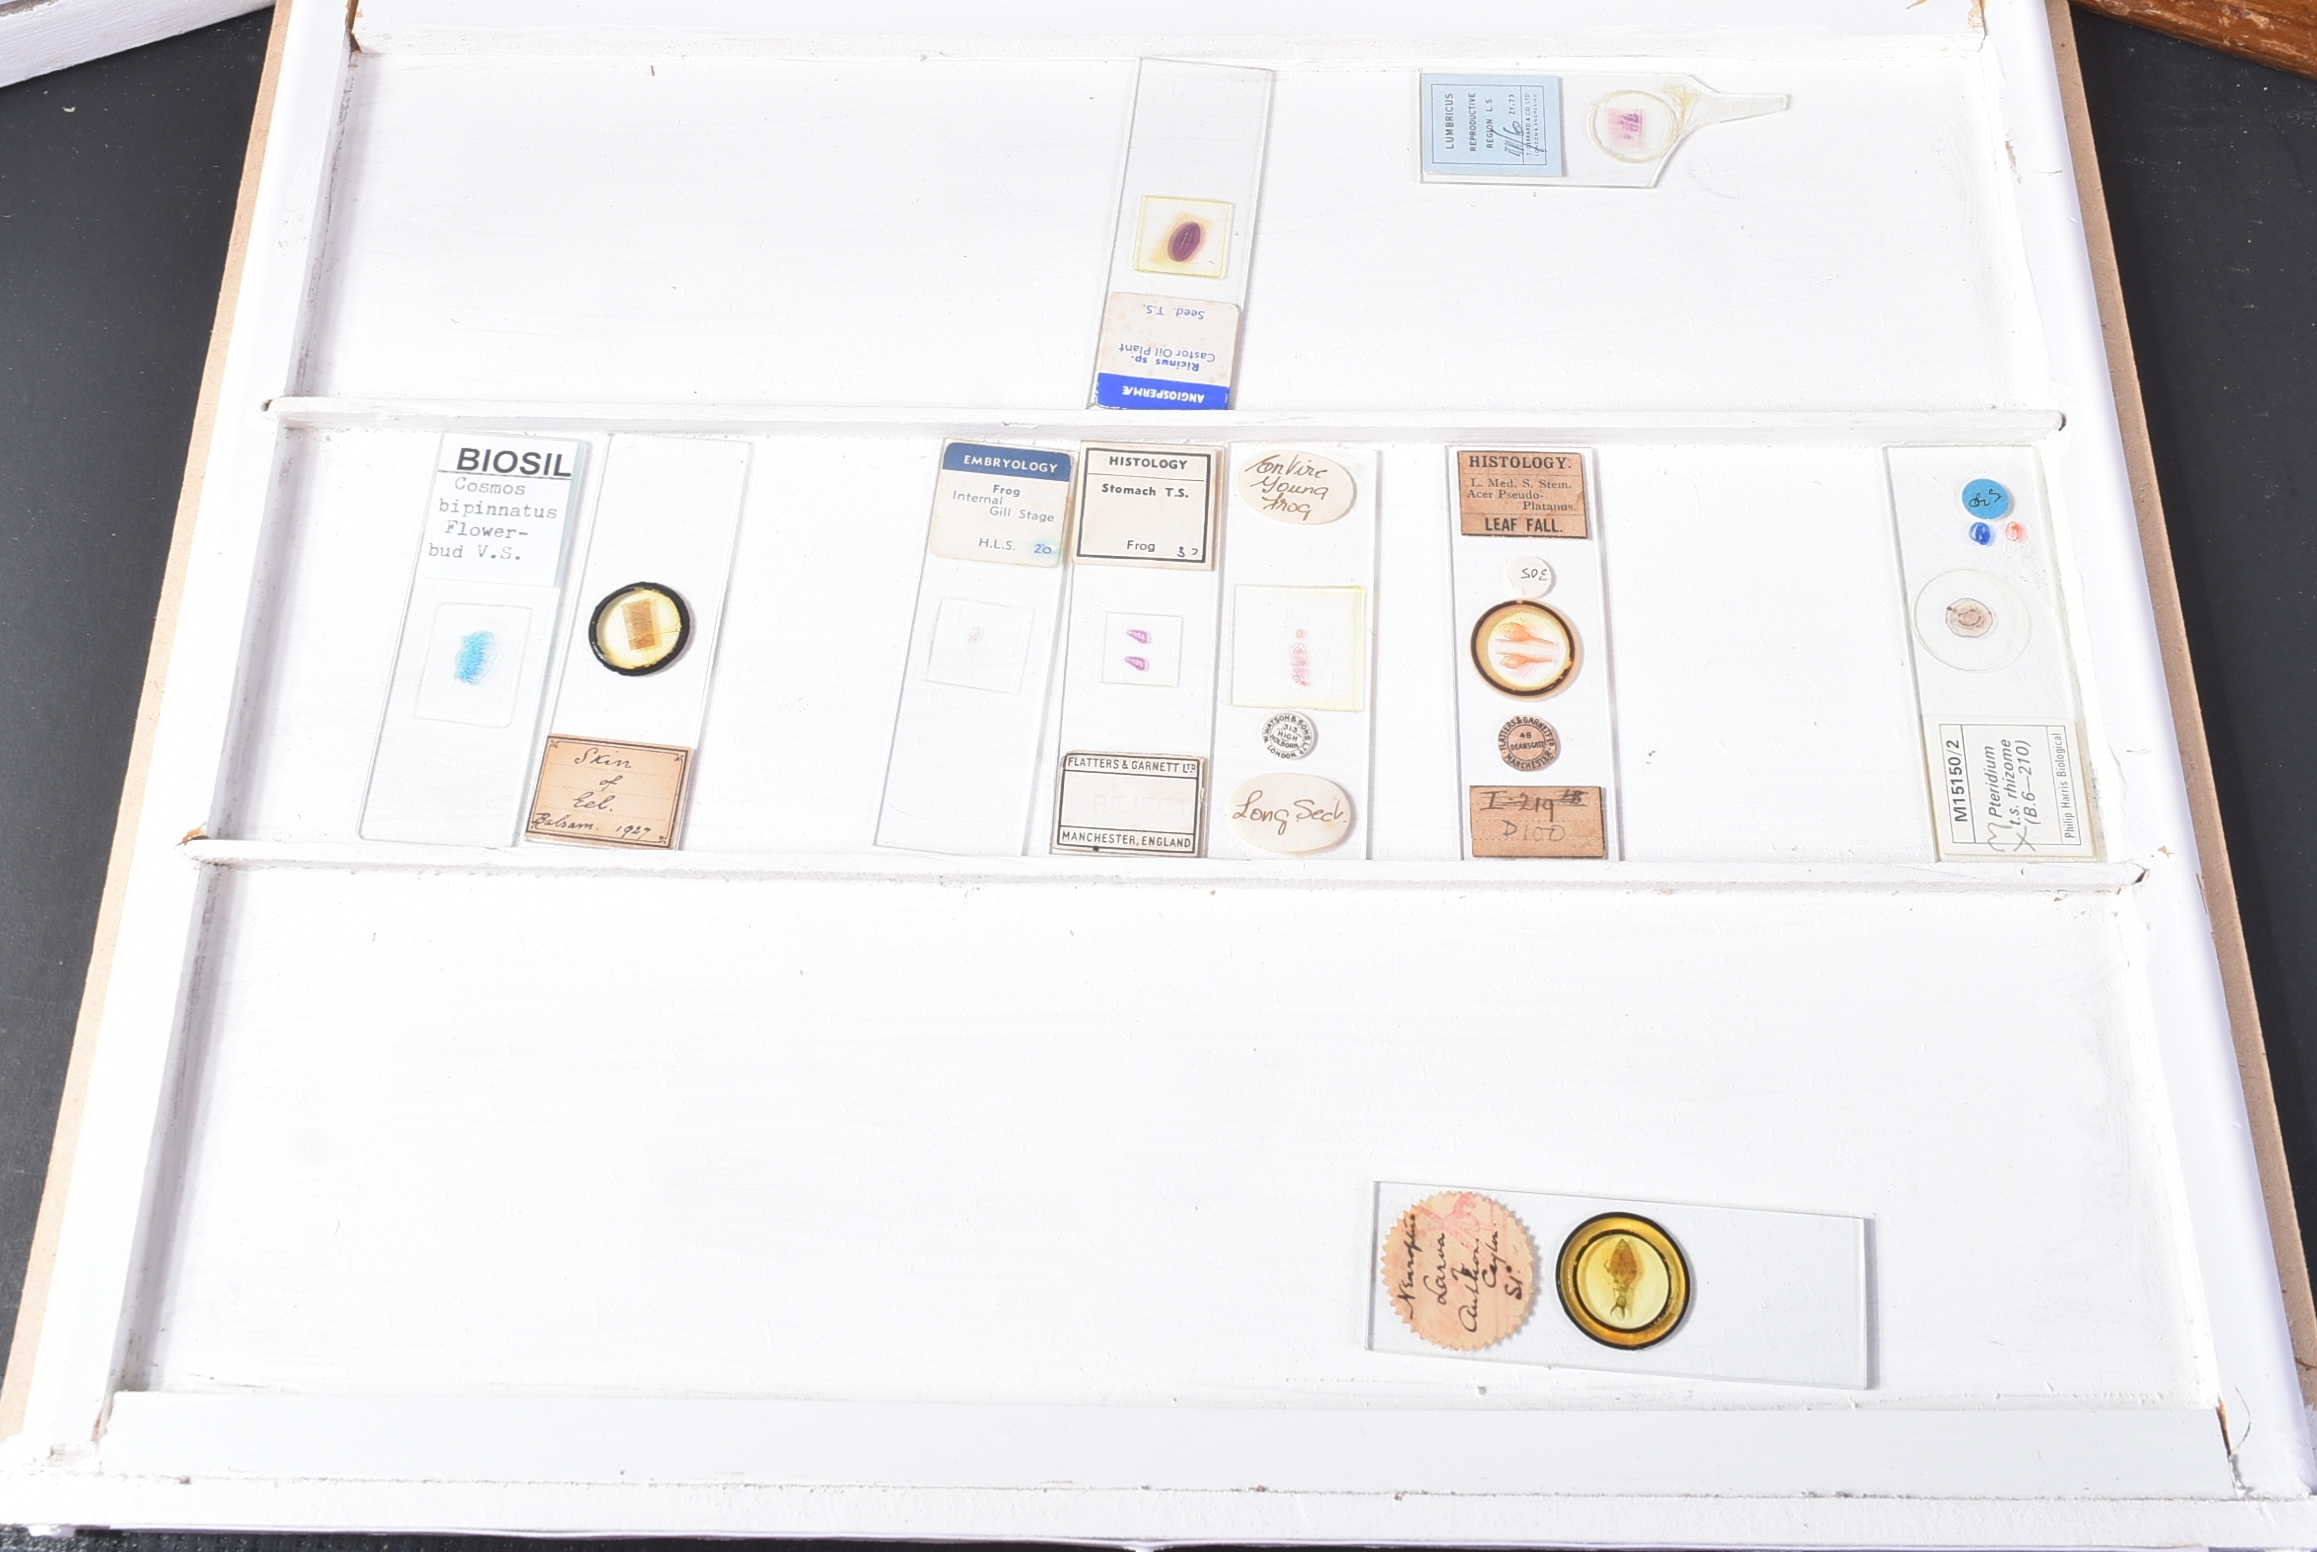 LARGE & EXTENSIVE BECK CABINET MICROSCOPE SLIDE COLLECTION - Image 59 of 101